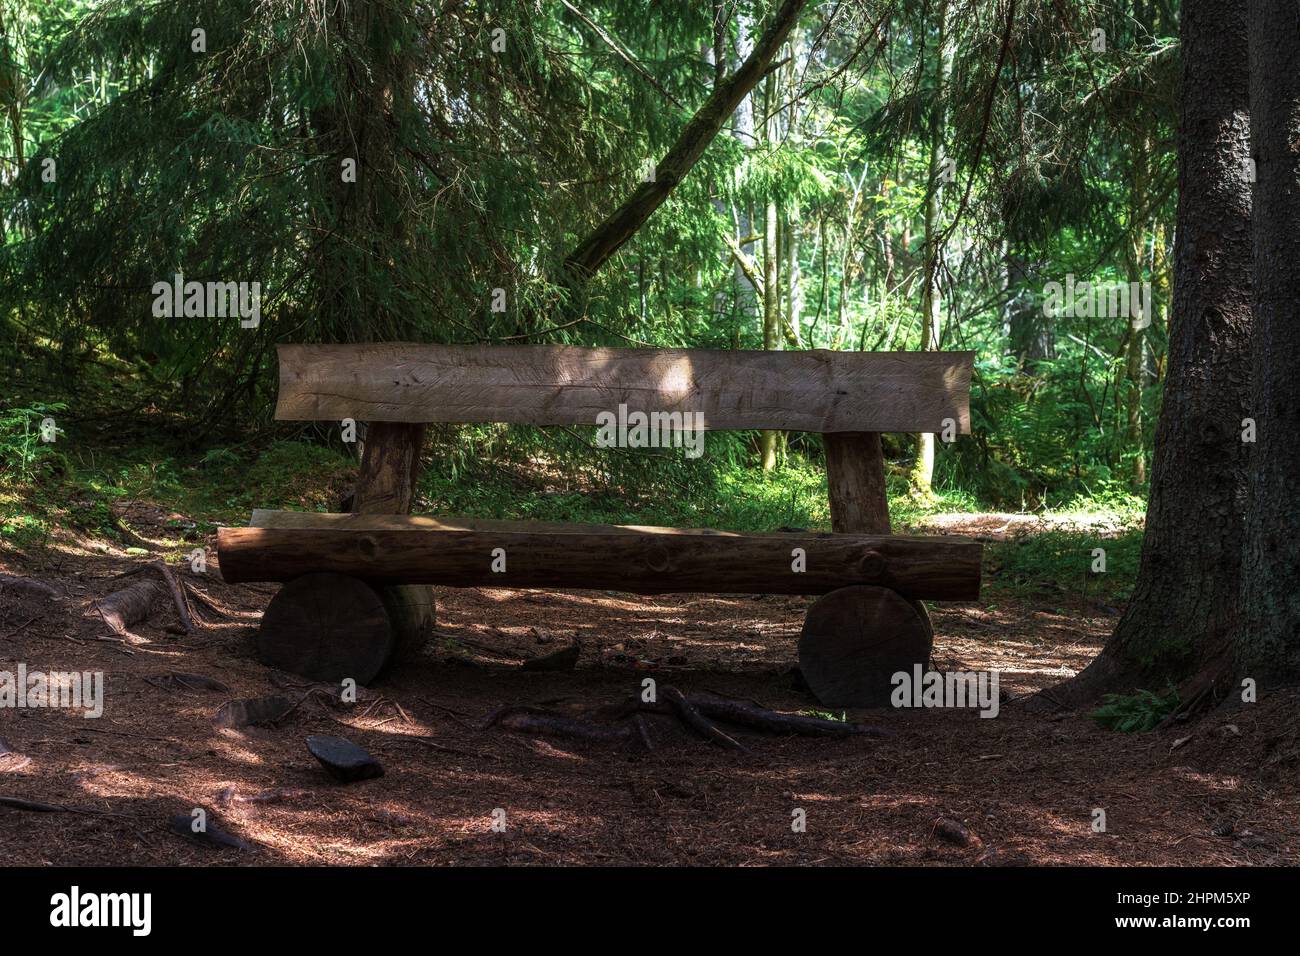 Massive bench made of logs on a forest path in a dense coniferous forest. Stock Photo